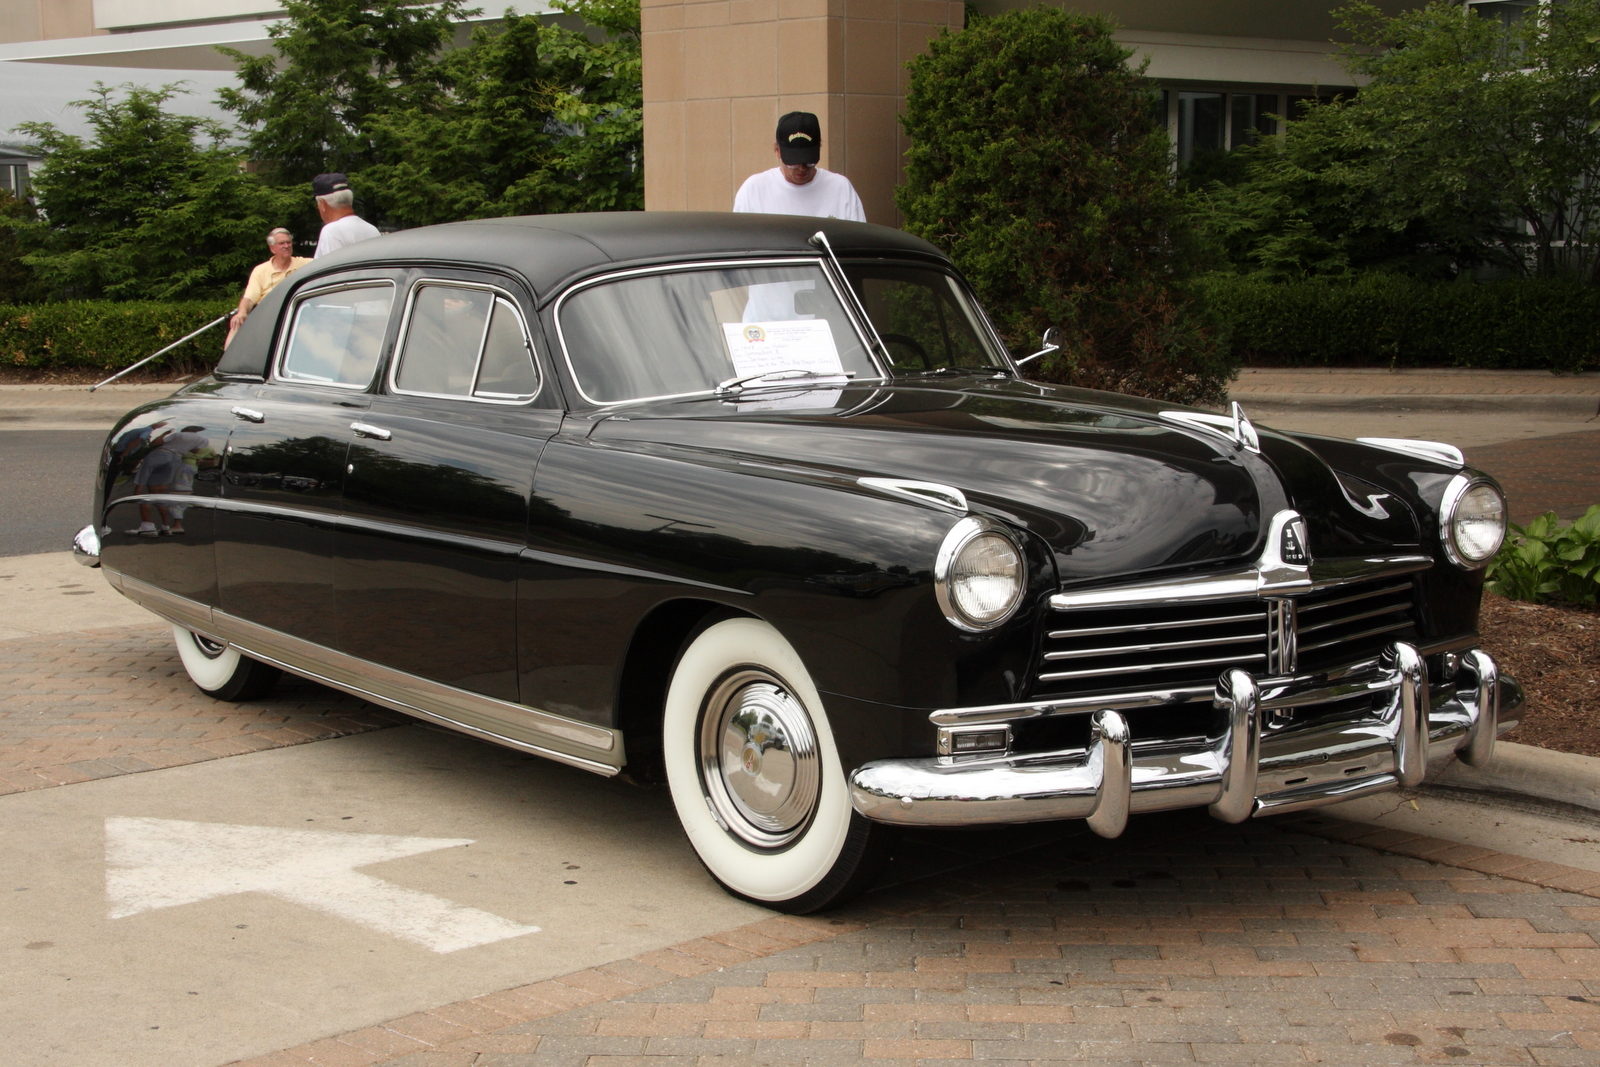 1948 Hudson Commodore Limousine | Flickr - Photo Sharing!